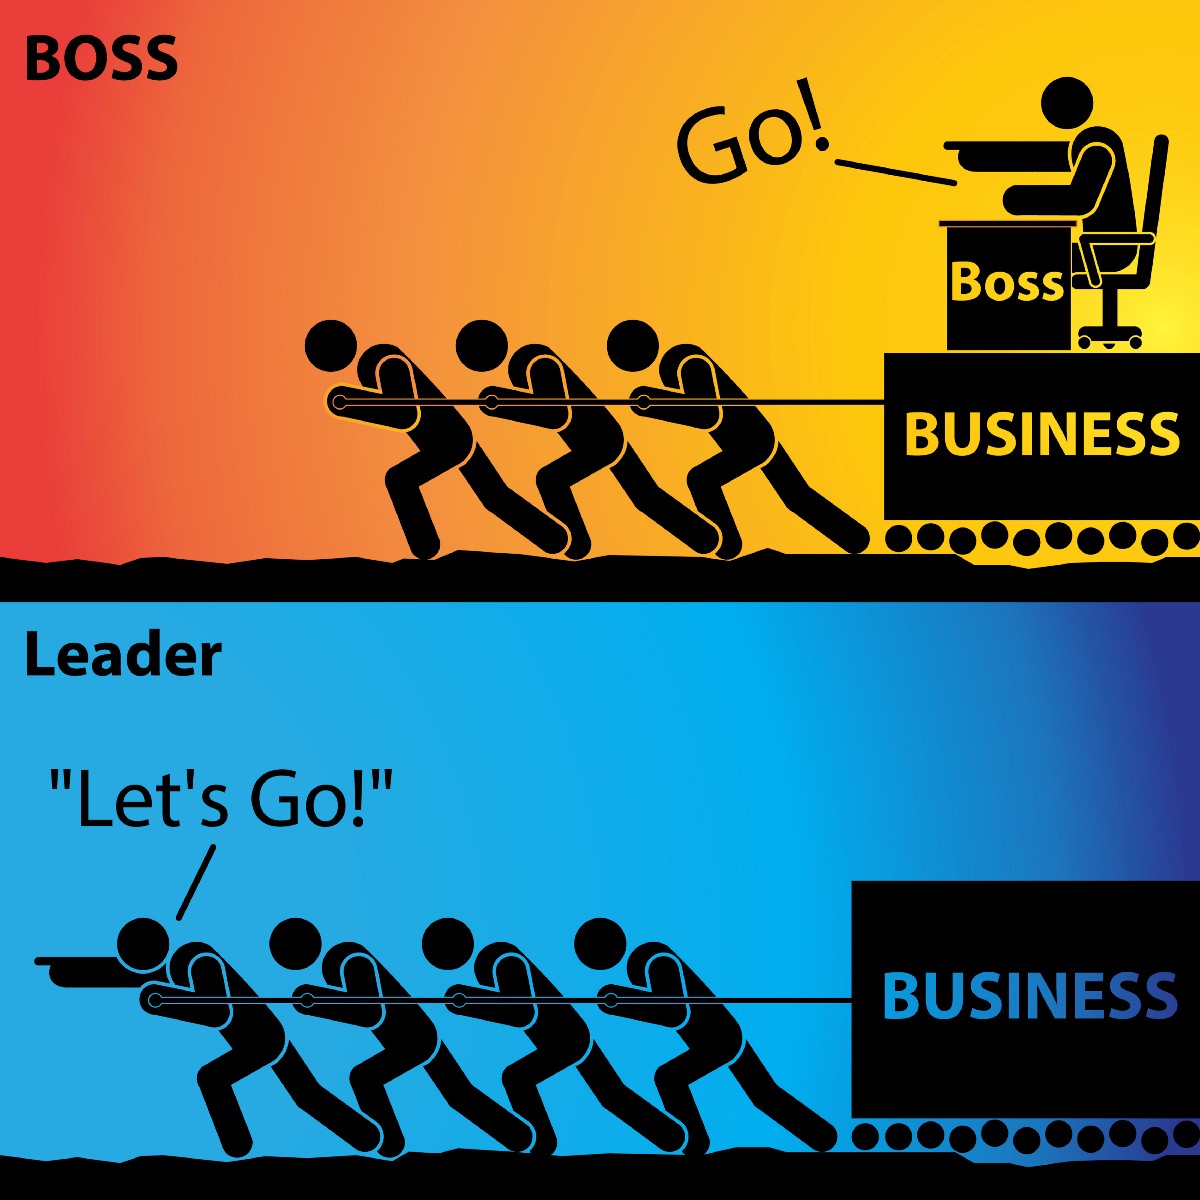 Am I a Boss or a Leader?